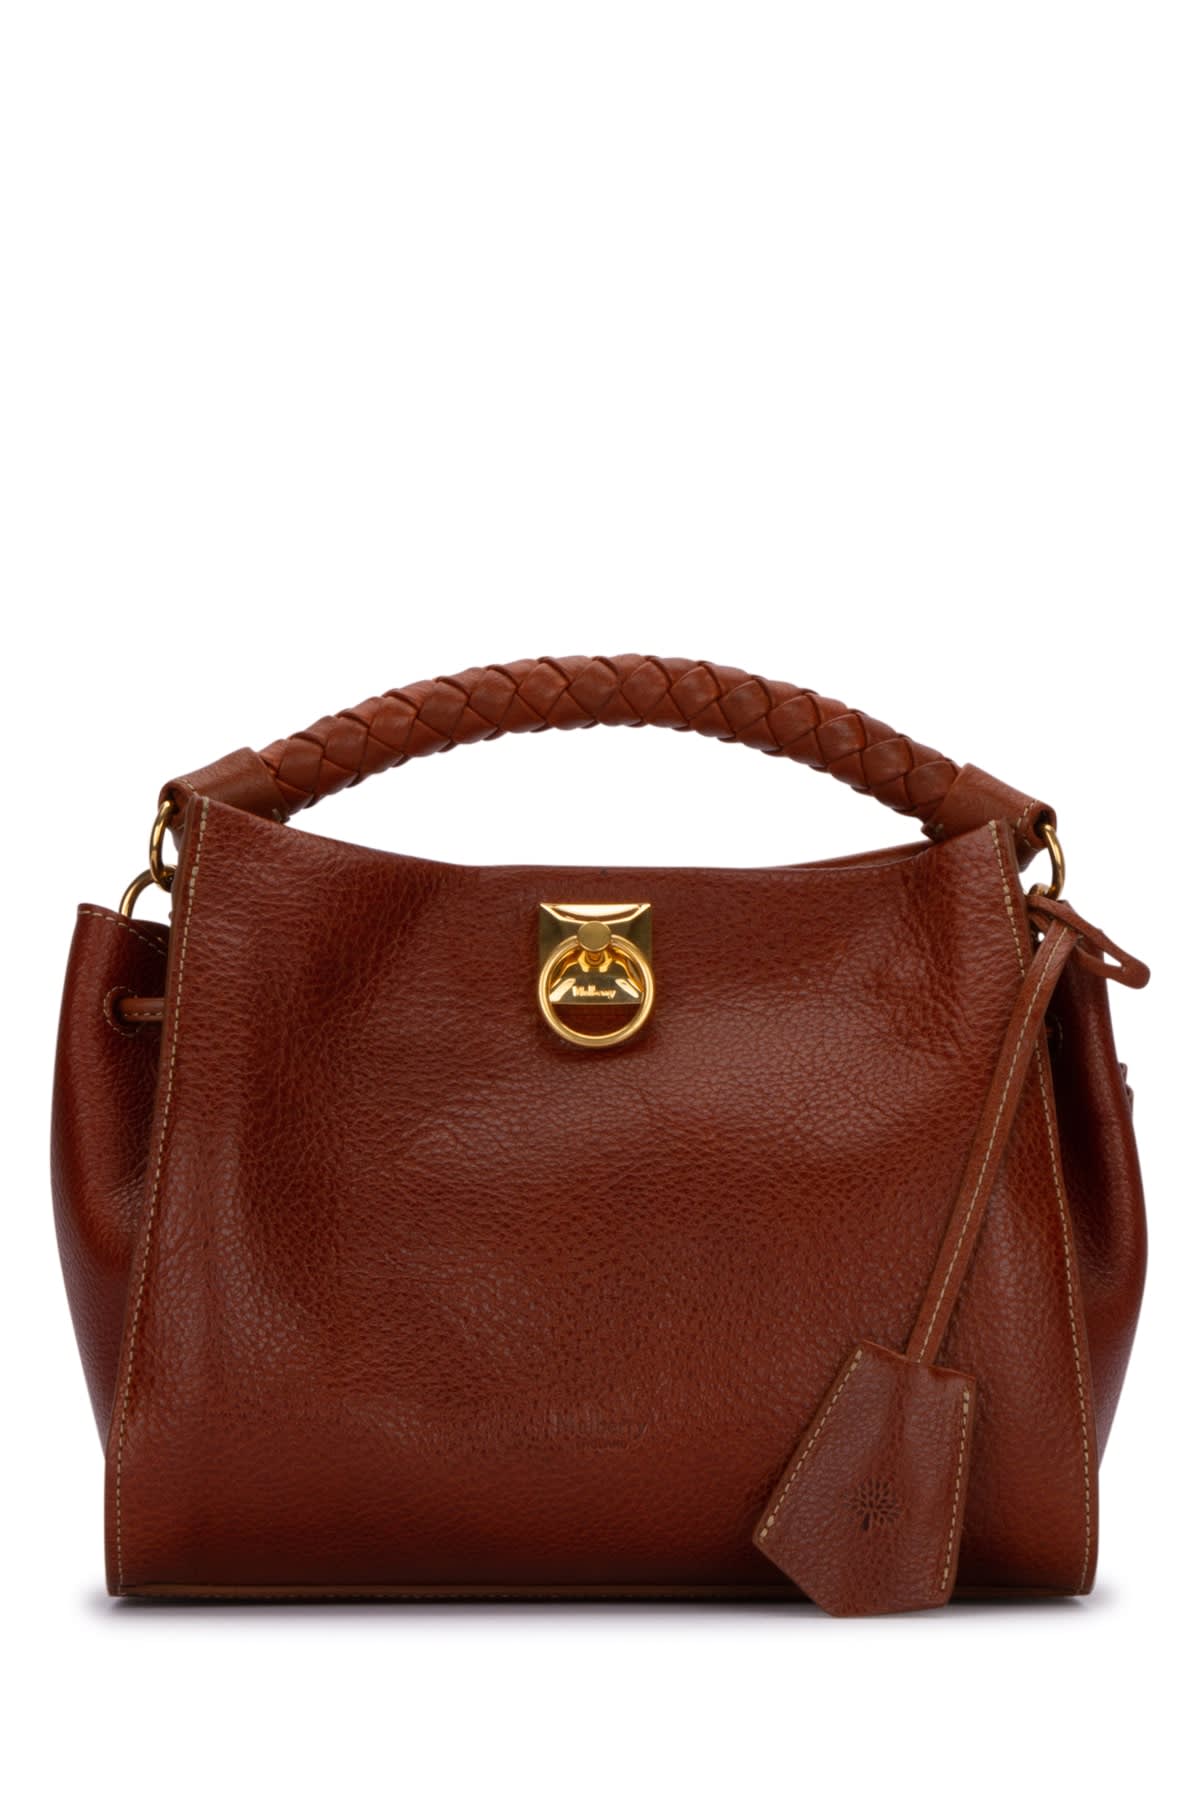 Shop Mulberry Borsa In G110